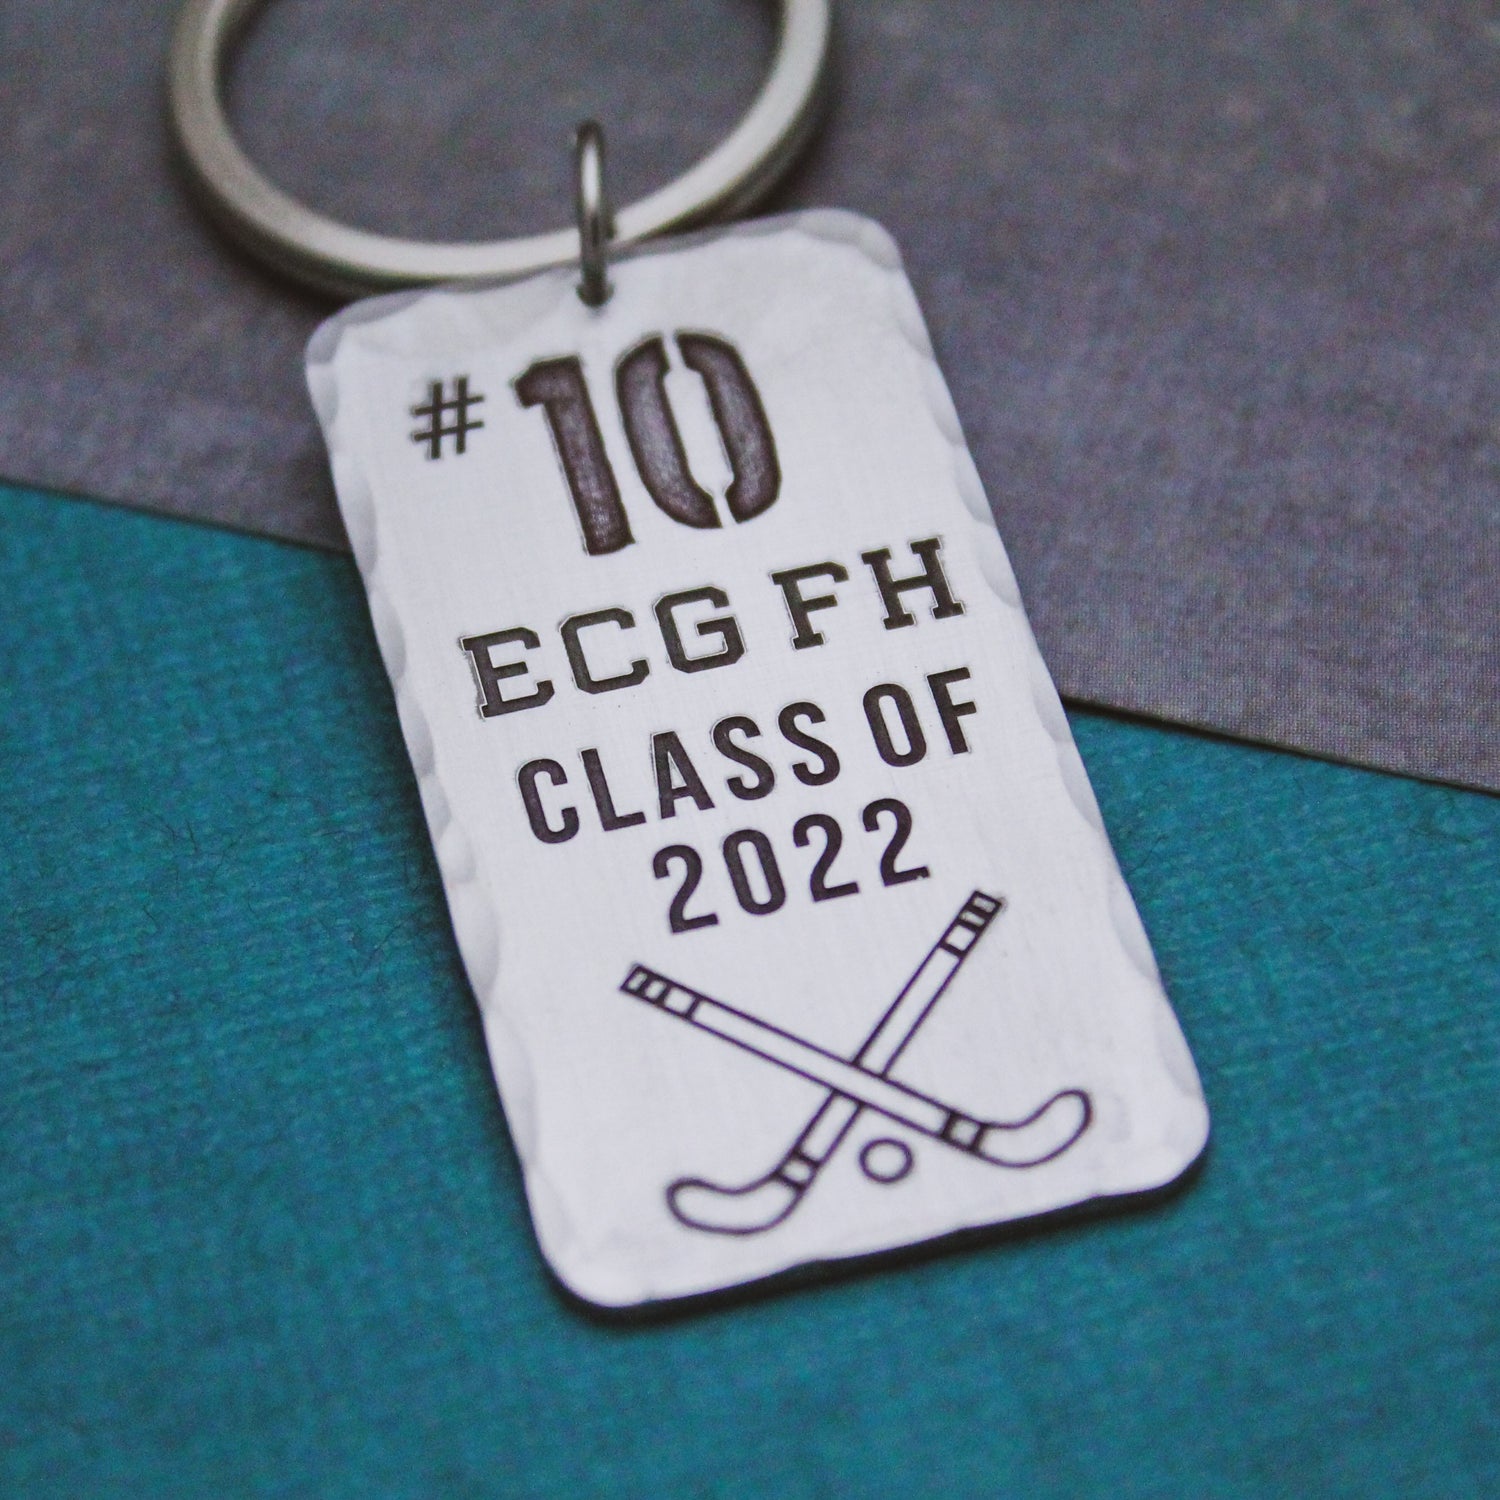 Personalized Sports Team Keychain, Custom Team Gift, Aluminum Lacrosse Keychain, Personalized Field Hockey Keychain, Team Gift, Hand Stamped